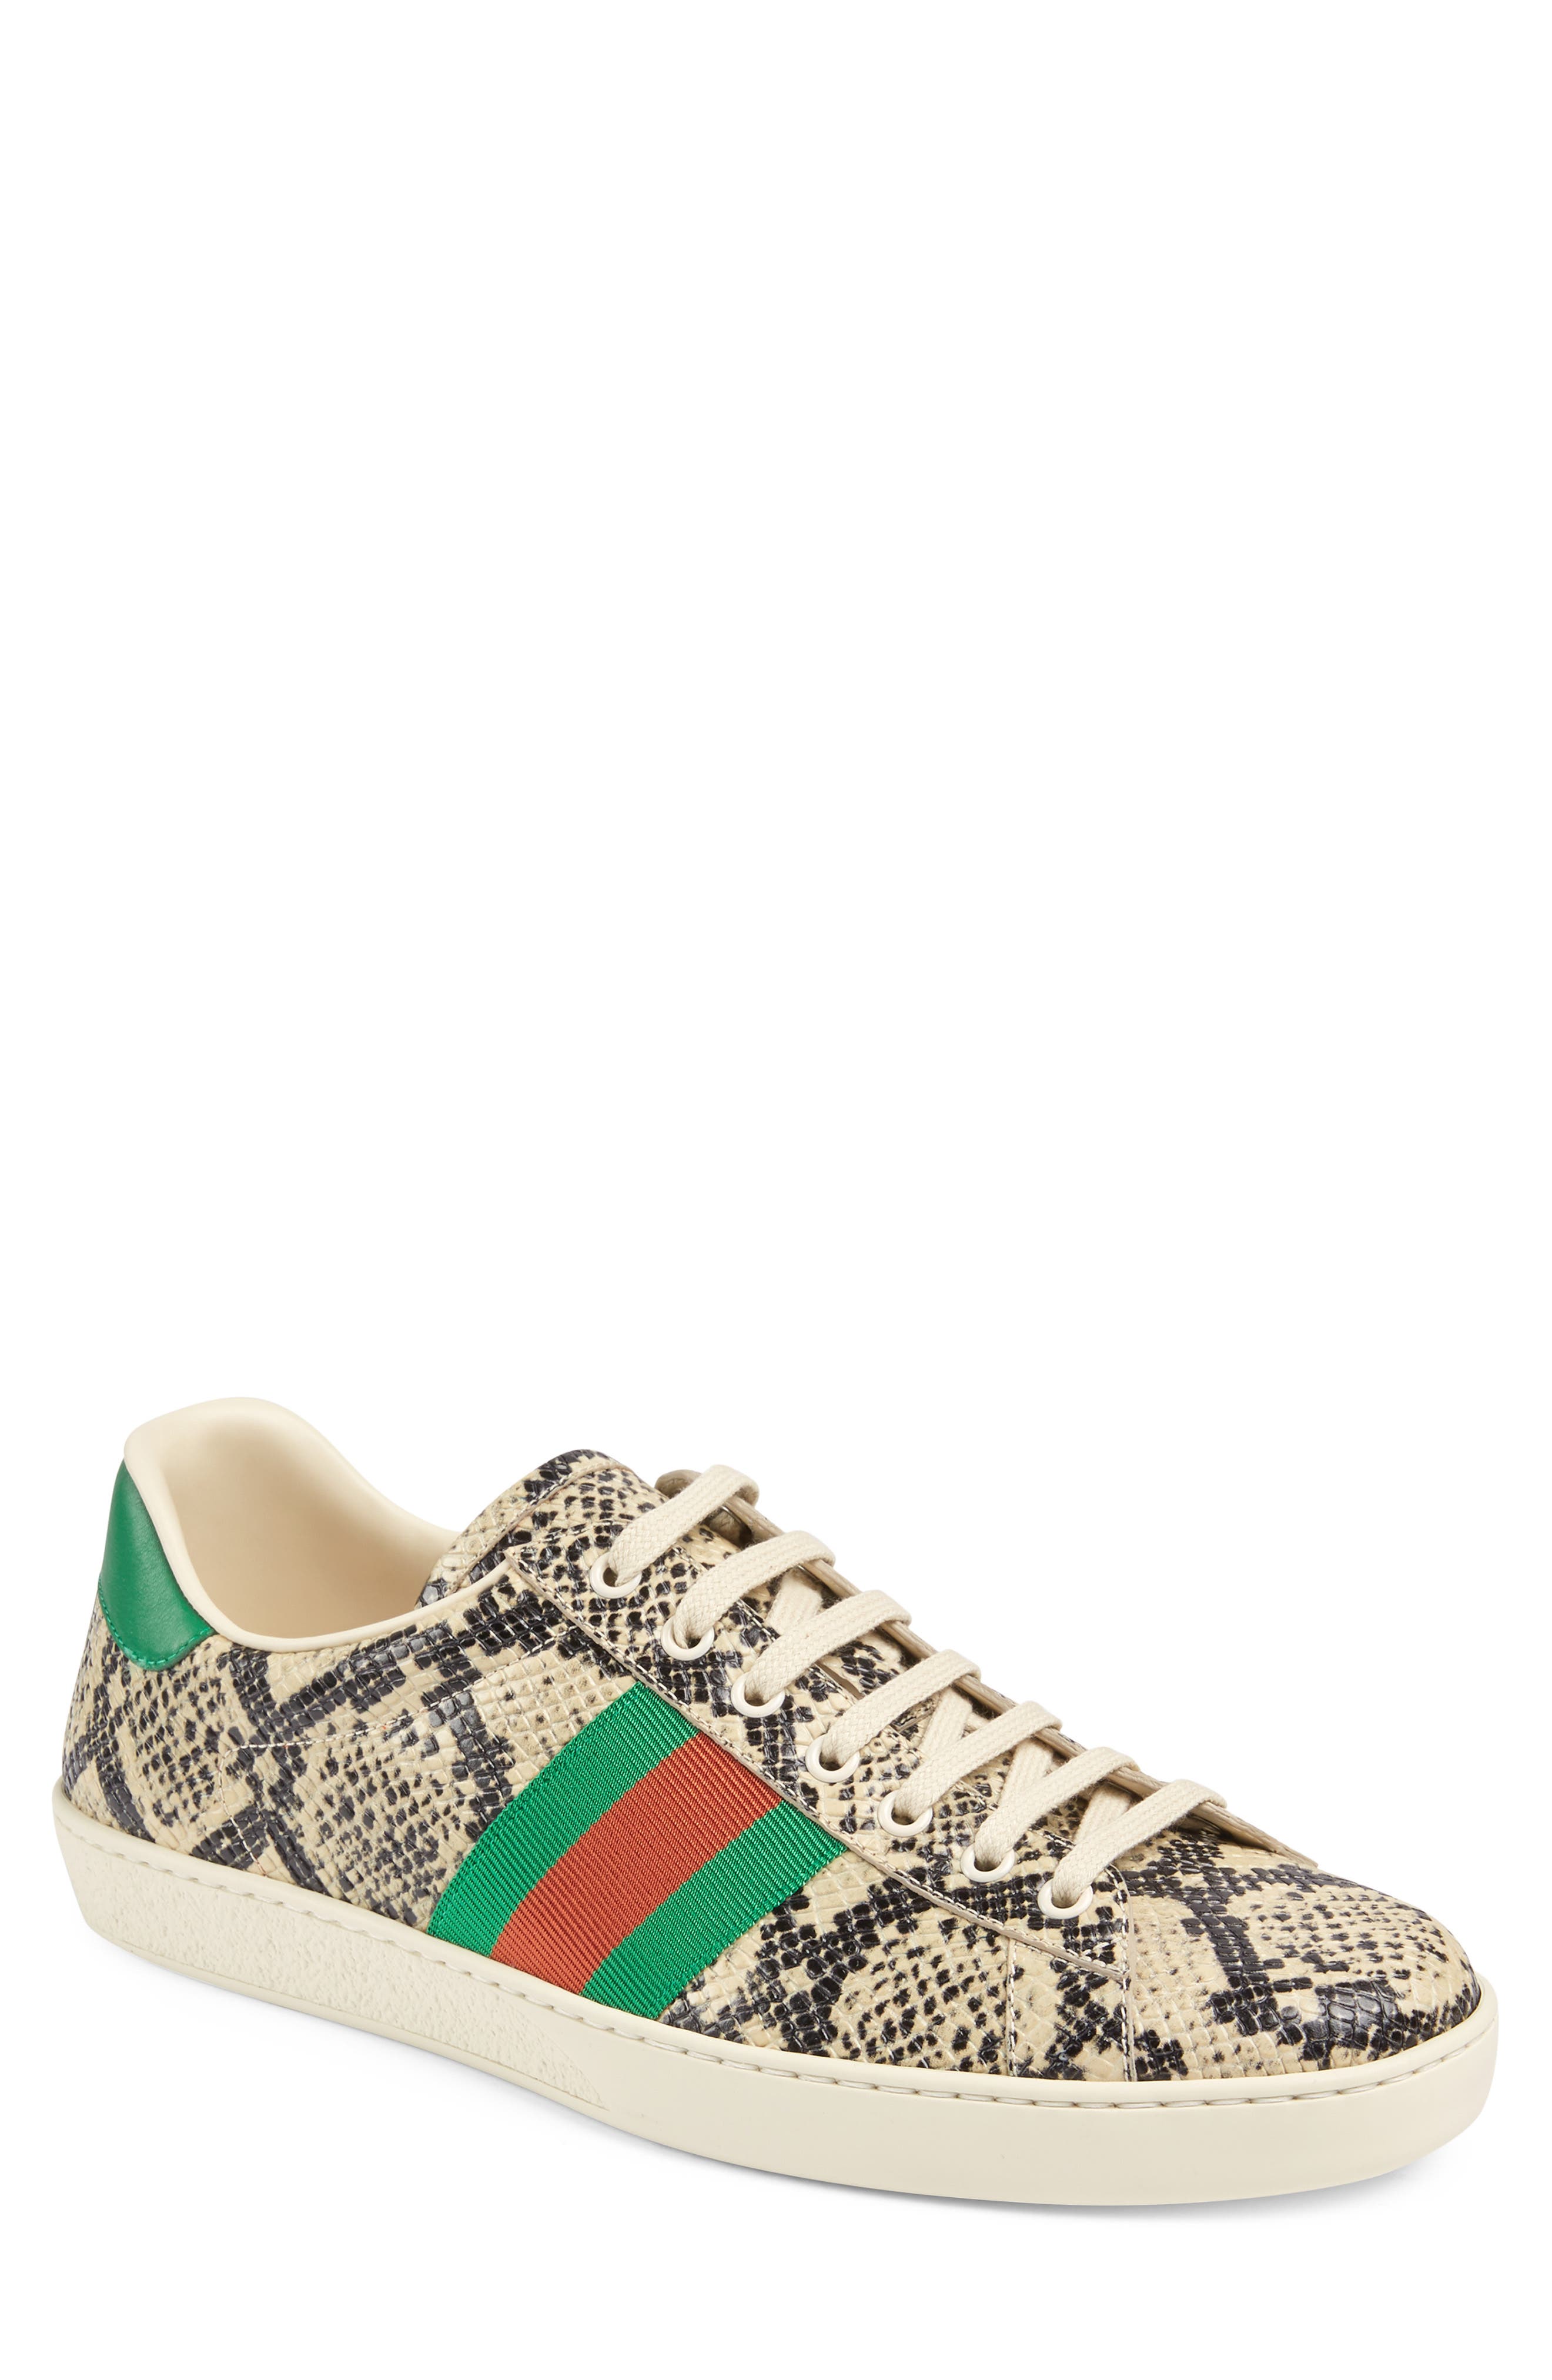 gucci ace | Nordstrom